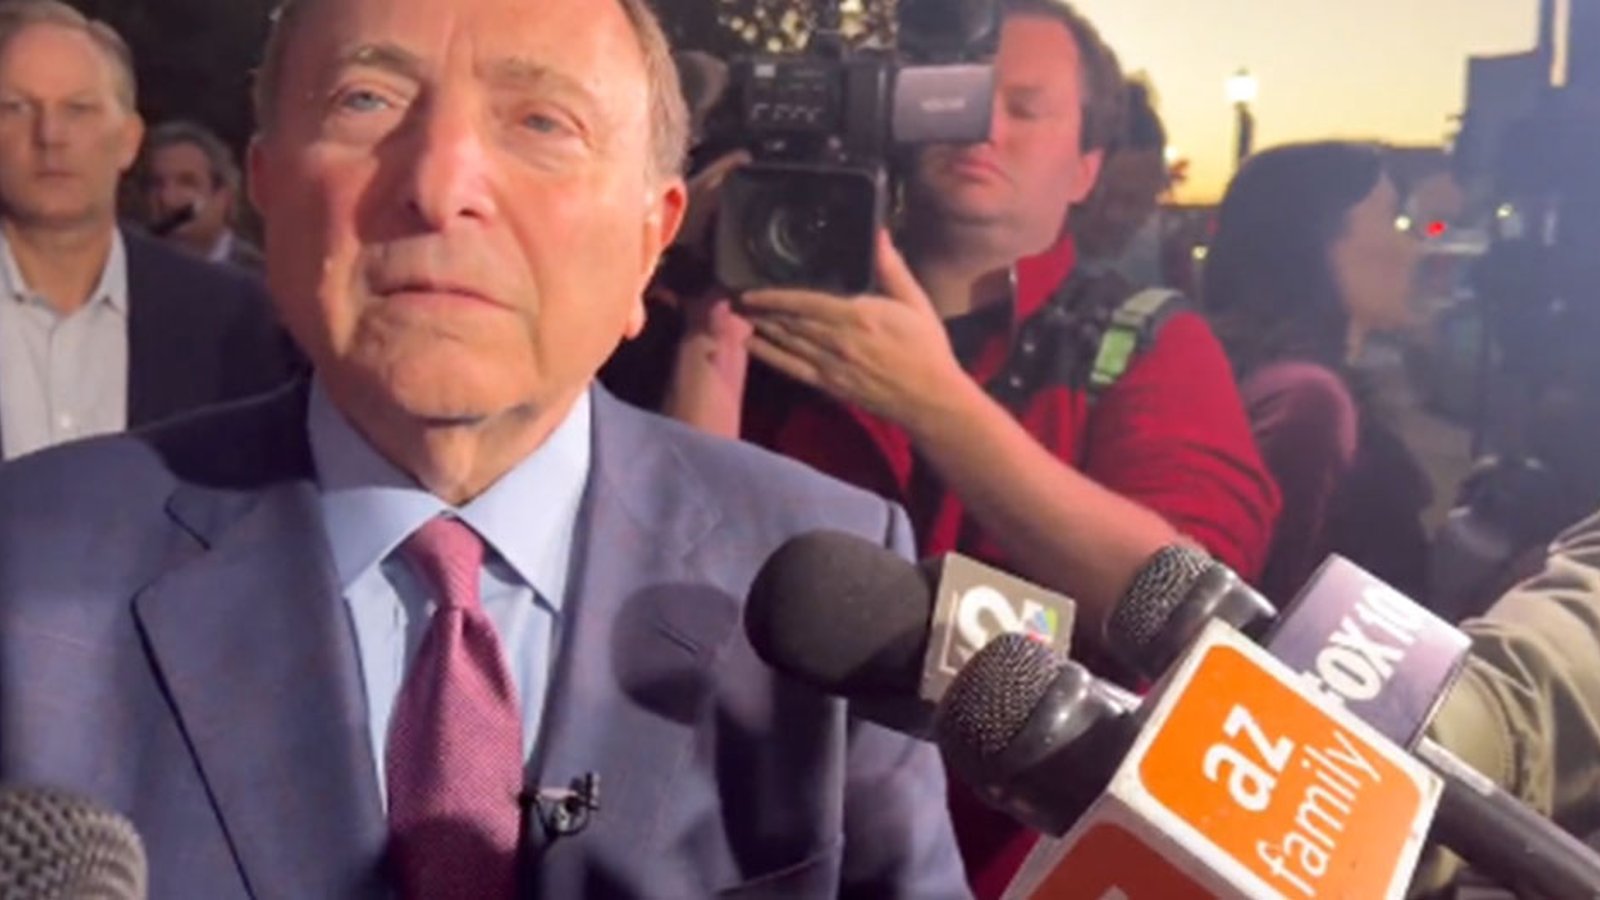 Gary Bettman swarmed by media as he arrives in Arizona to help bail out the Coyotes